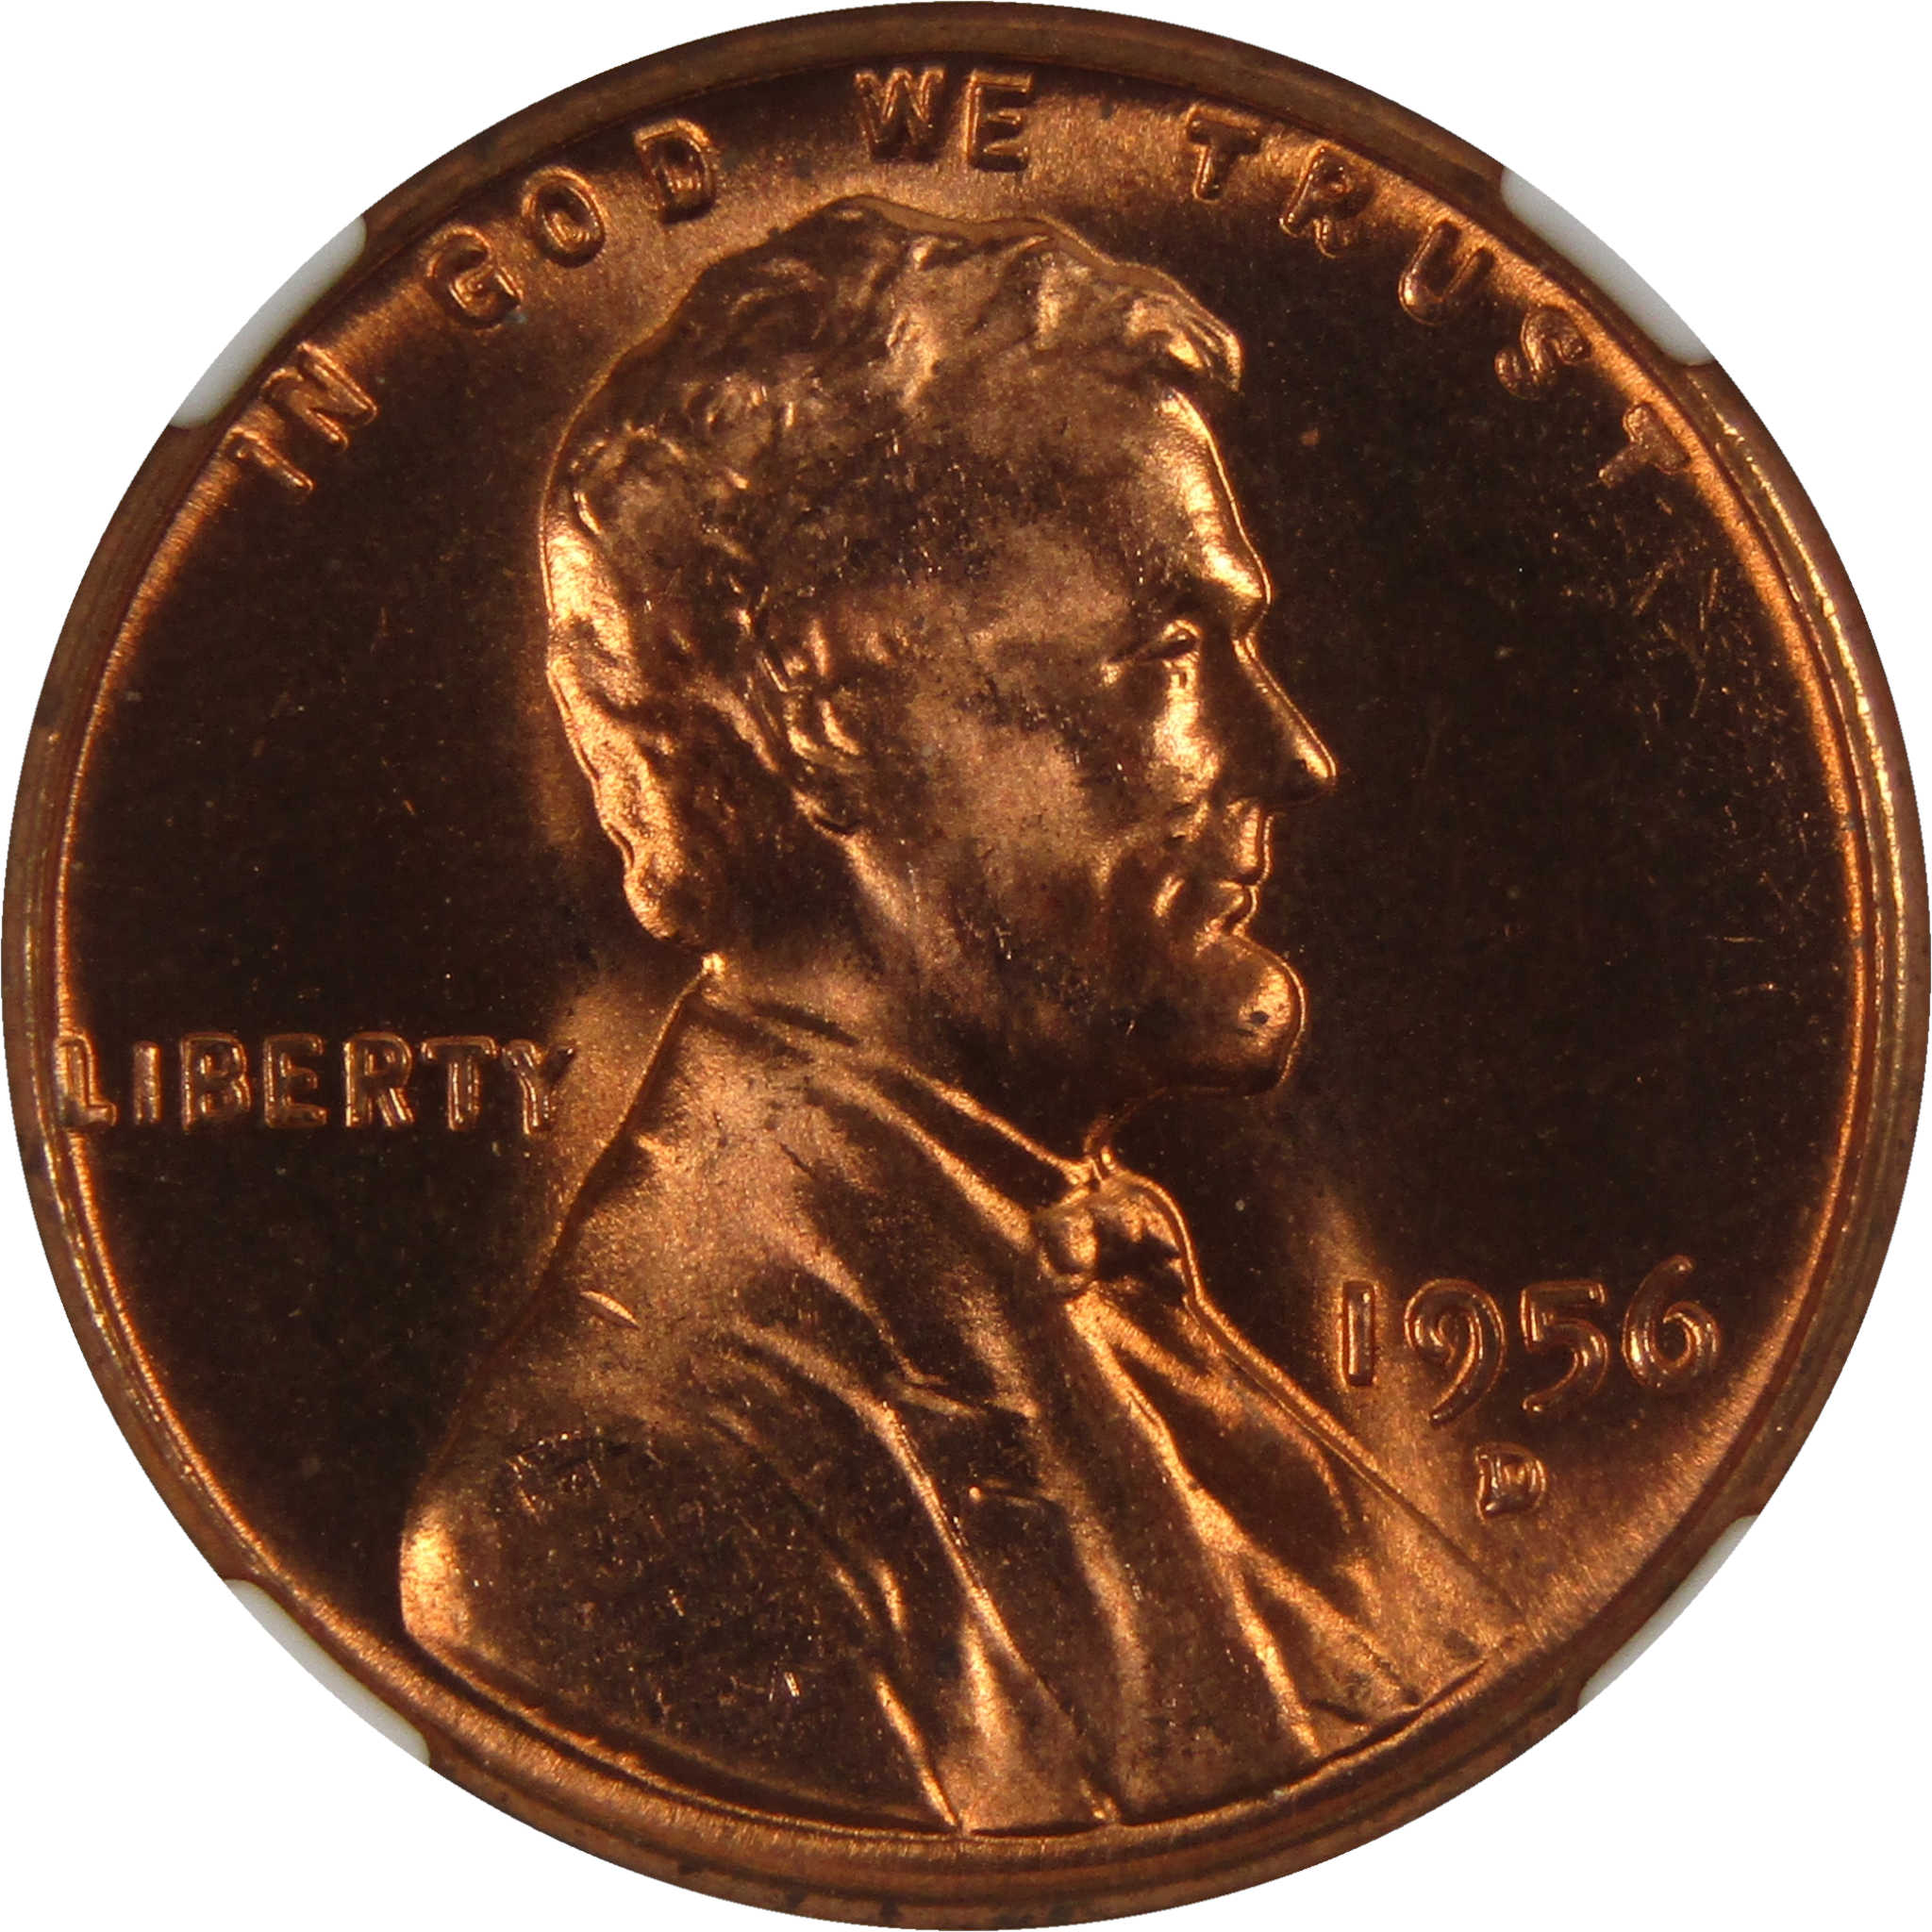 1956 D Lincoln Wheat Cent MS 66 RD NGC Penny Uncirculated SKU:I3674